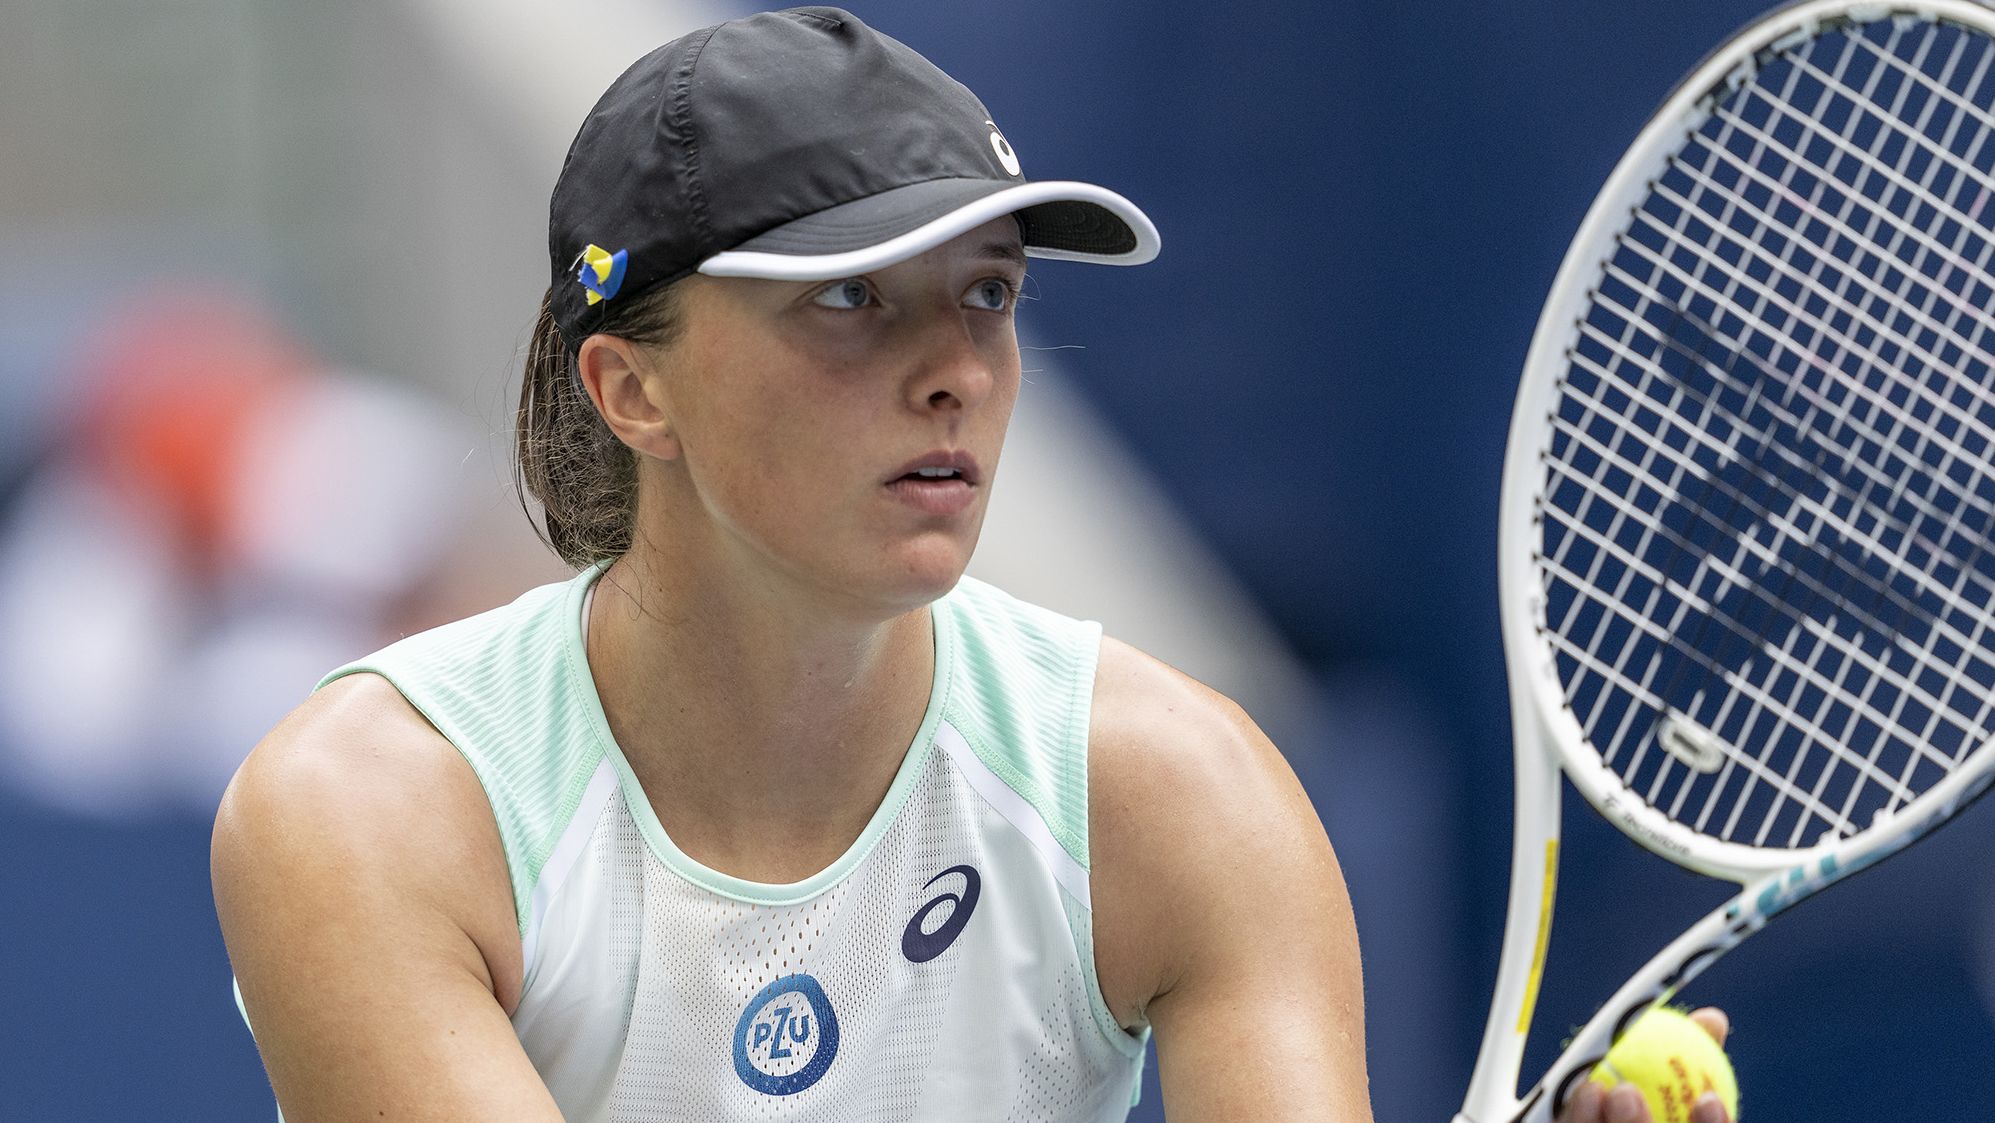 Iga Swiatek struggled against Jule Niemeier at the US Open but moved on to the quarterfinals.